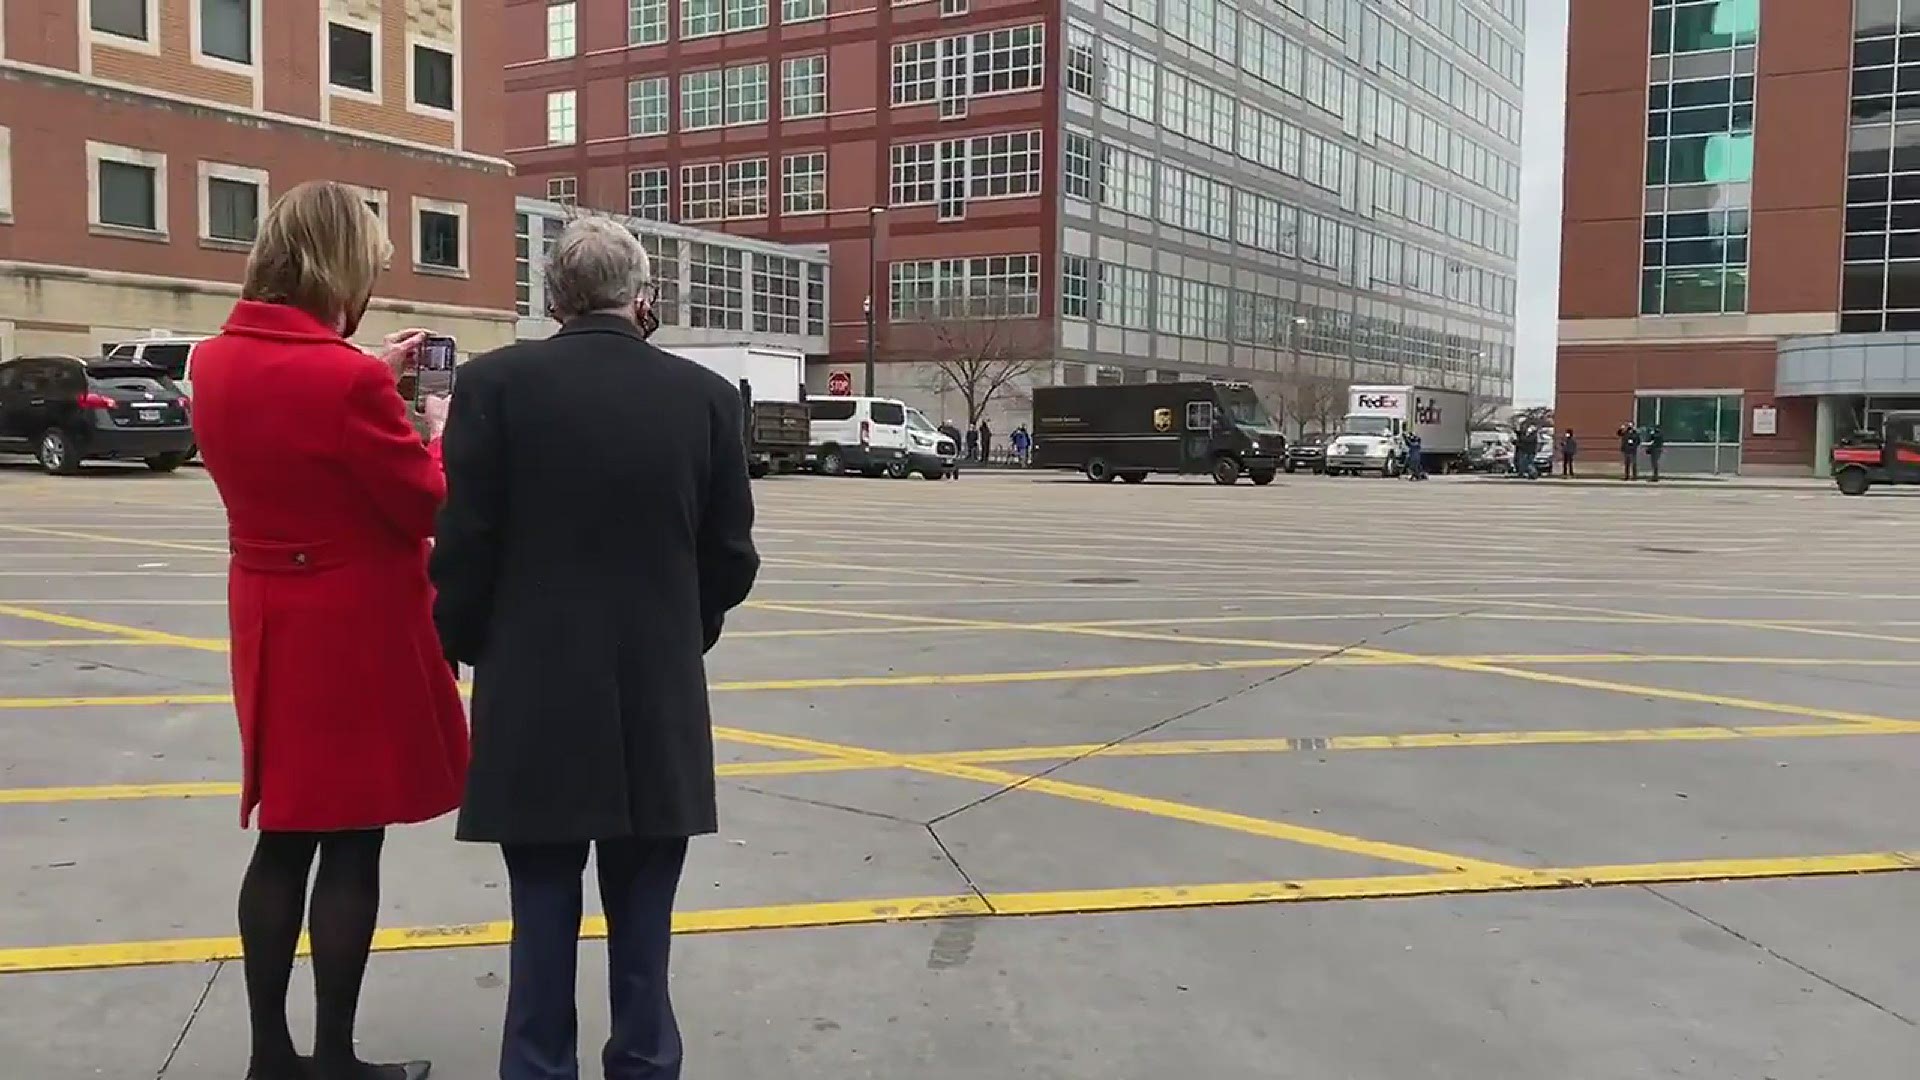 Gov. Mike DeWine shared this video of him and first lady Fran DeWine, calling the delivery "an historic occasion."